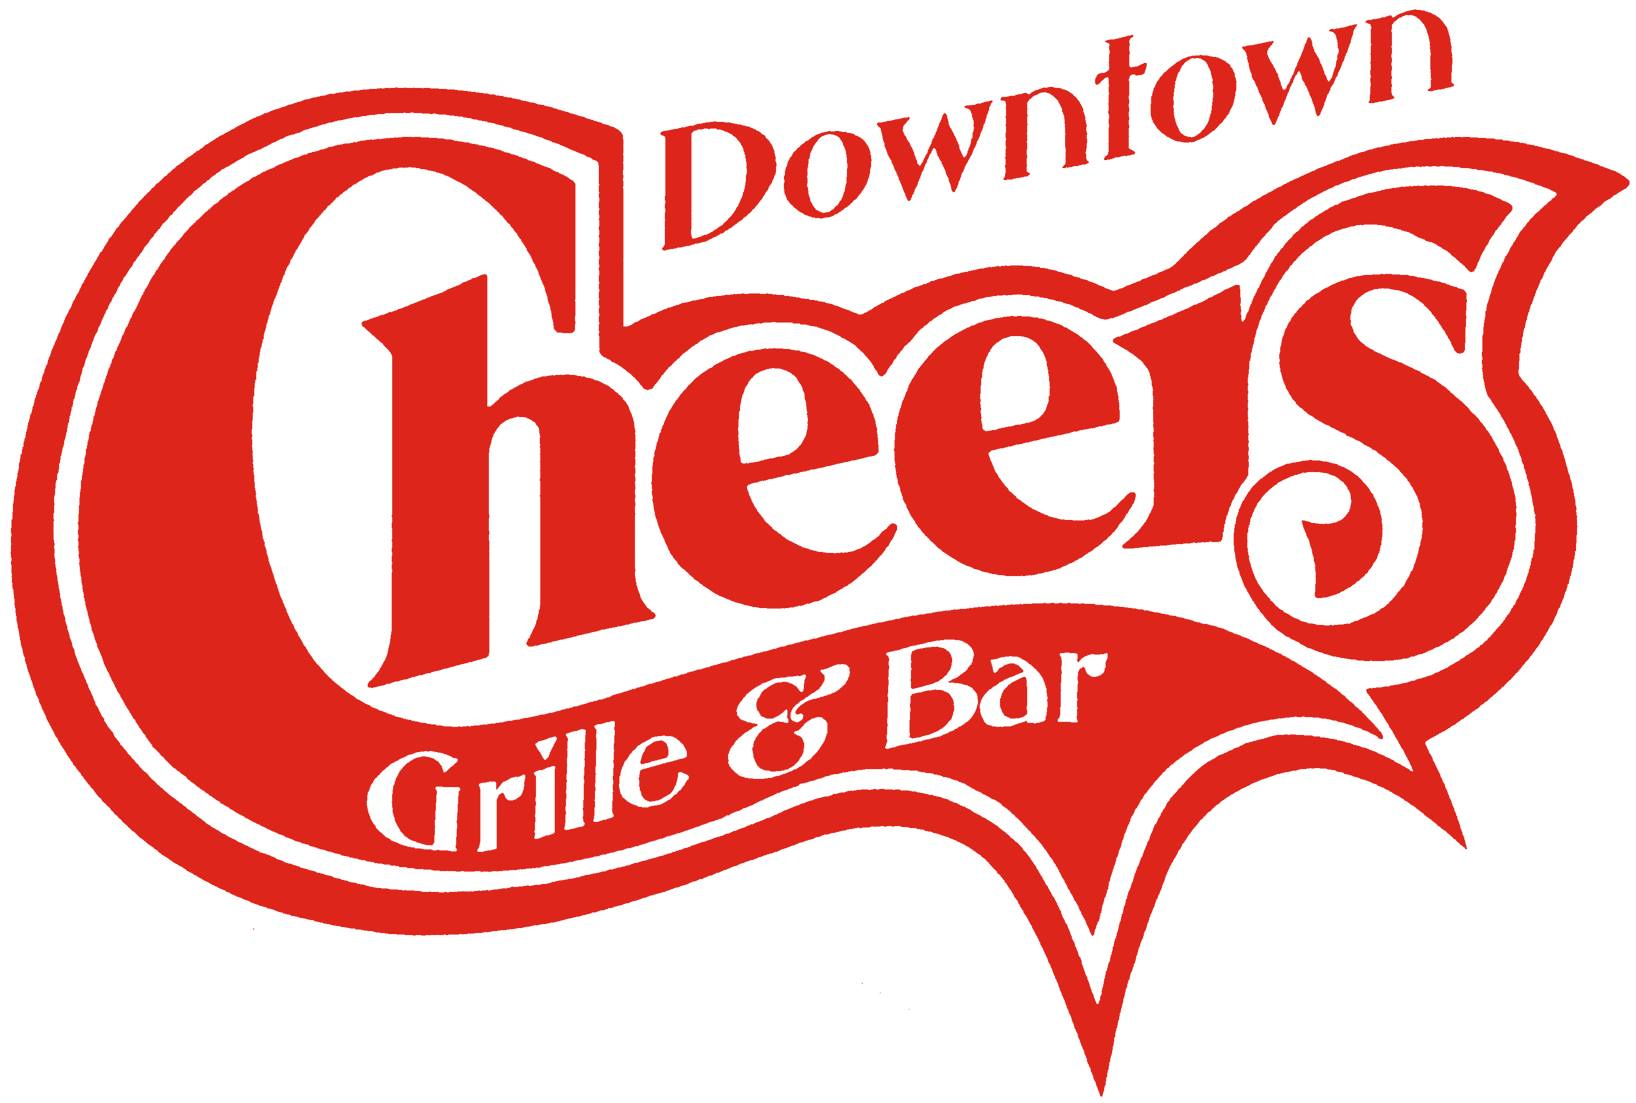 $25.00 Cheers Gift Card